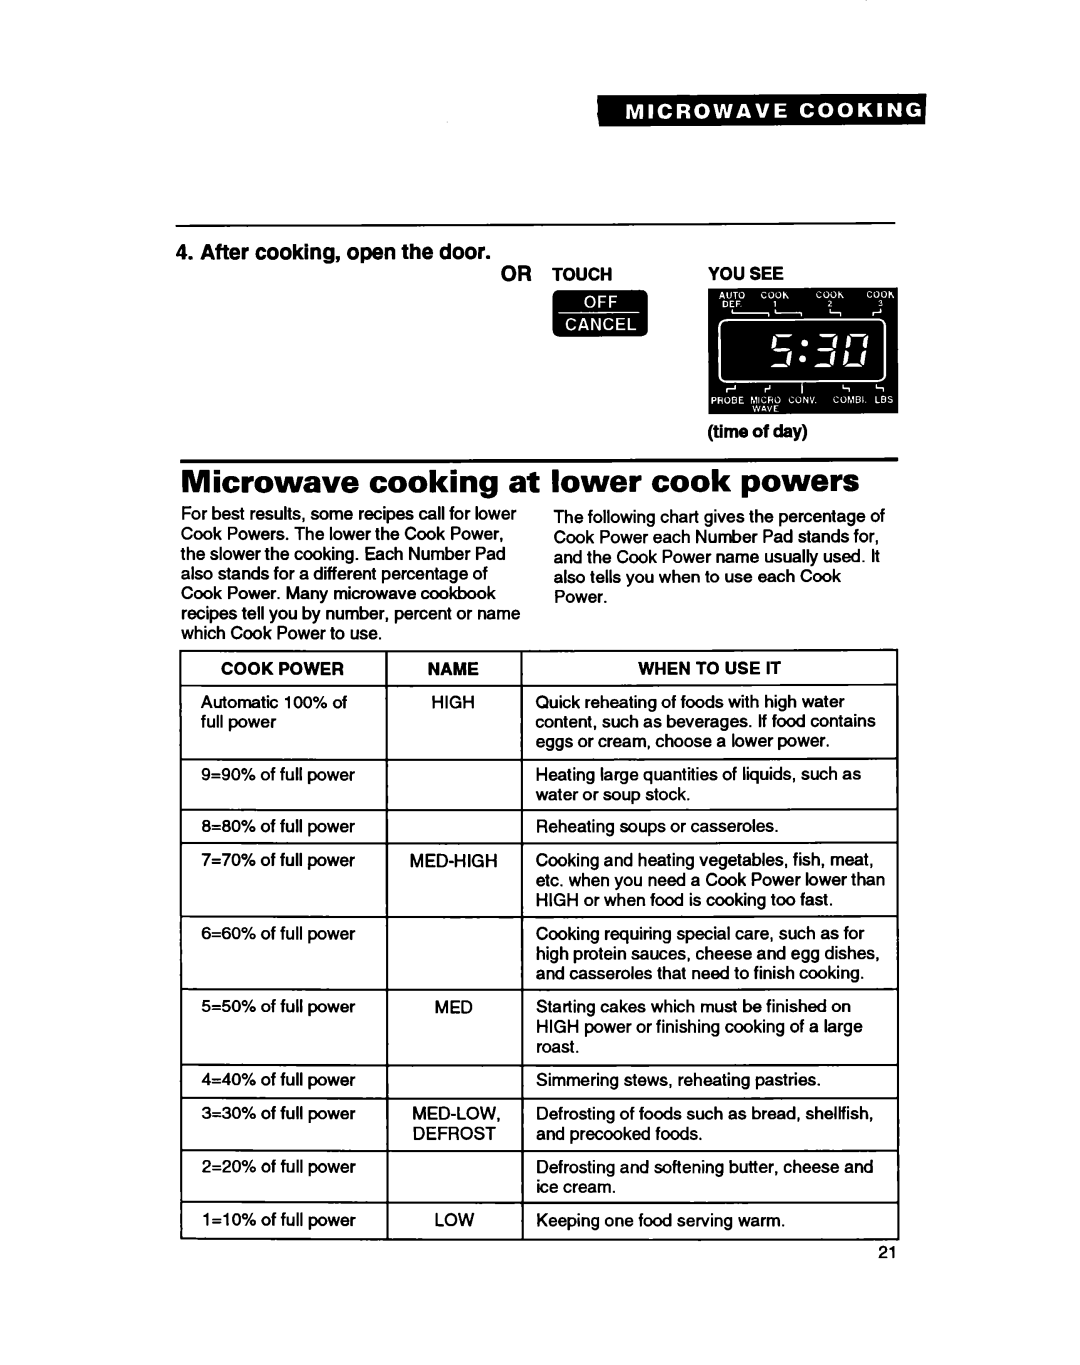 Whirlpool MC8130XA warranty Microwave cooking at lower cook powers, After cooking, open the door 